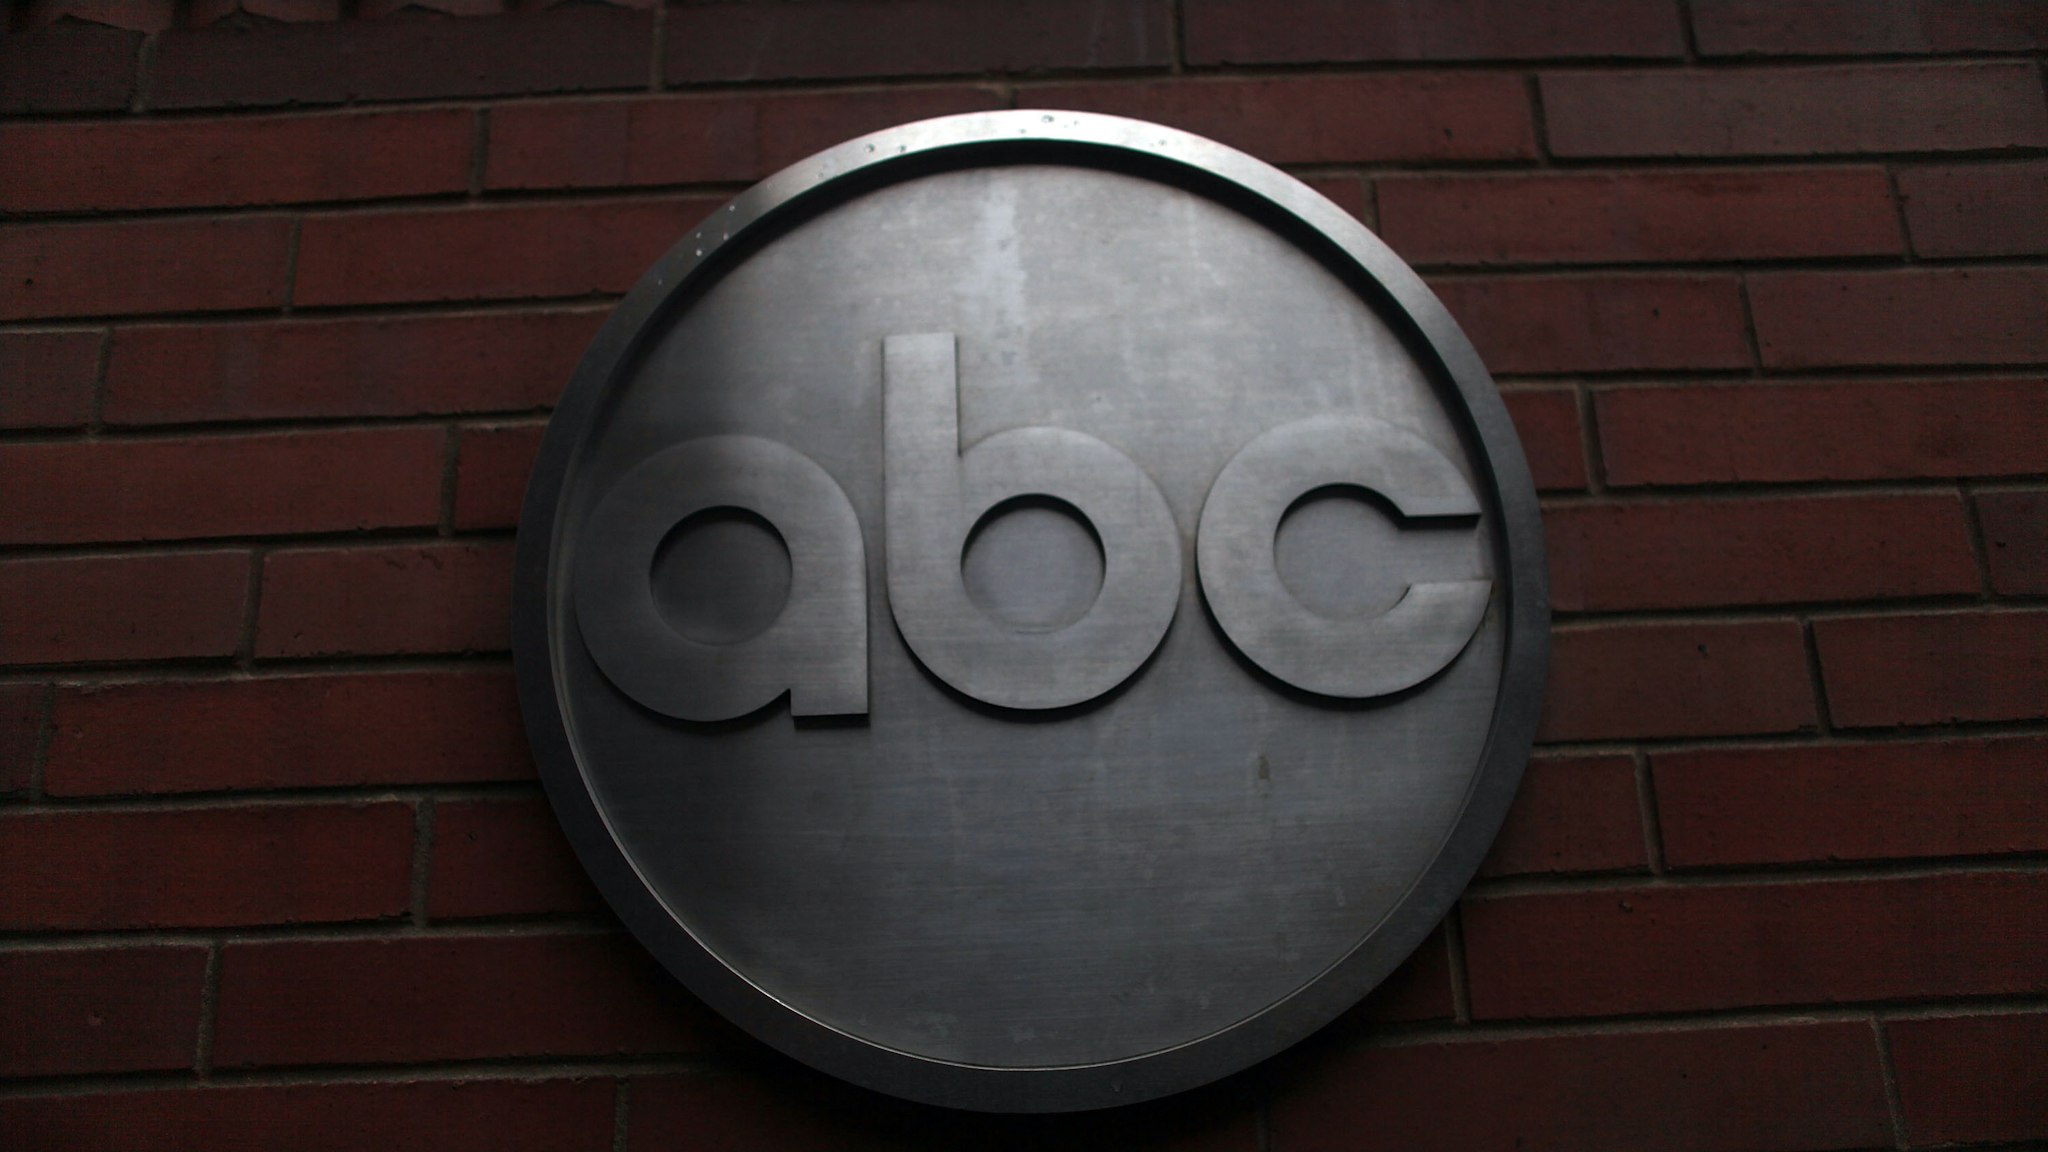 he ABC logo is viewed outside of ABC headquarters February 24, 2010 in New York, New York. ABC has announced that the television news division plans to cut 20-25 percent of its workforce, or between 300-400 people, through buyouts or layoffs. The news division plans to use more contractors and freelancers to make up for the loss of fulltime employees. (Photo by Spencer Platt/Getty Images)